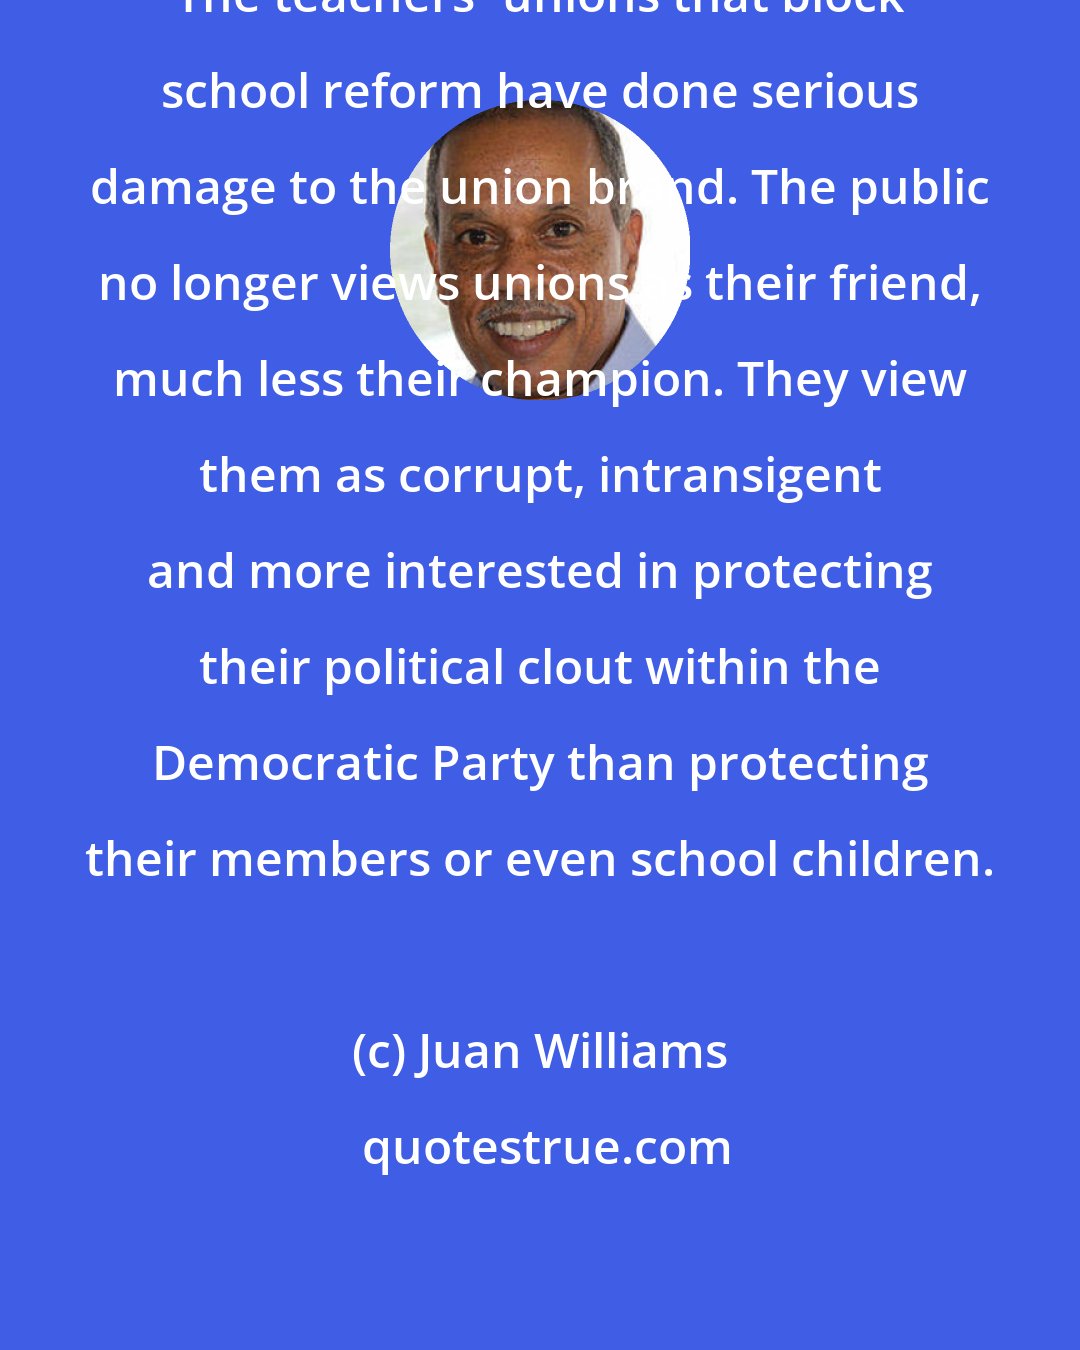 Juan Williams: The teachers' unions that block school reform have done serious damage to the union brand. The public no longer views unions as their friend, much less their champion. They view them as corrupt, intransigent and more interested in protecting their political clout within the Democratic Party than protecting their members or even school children.